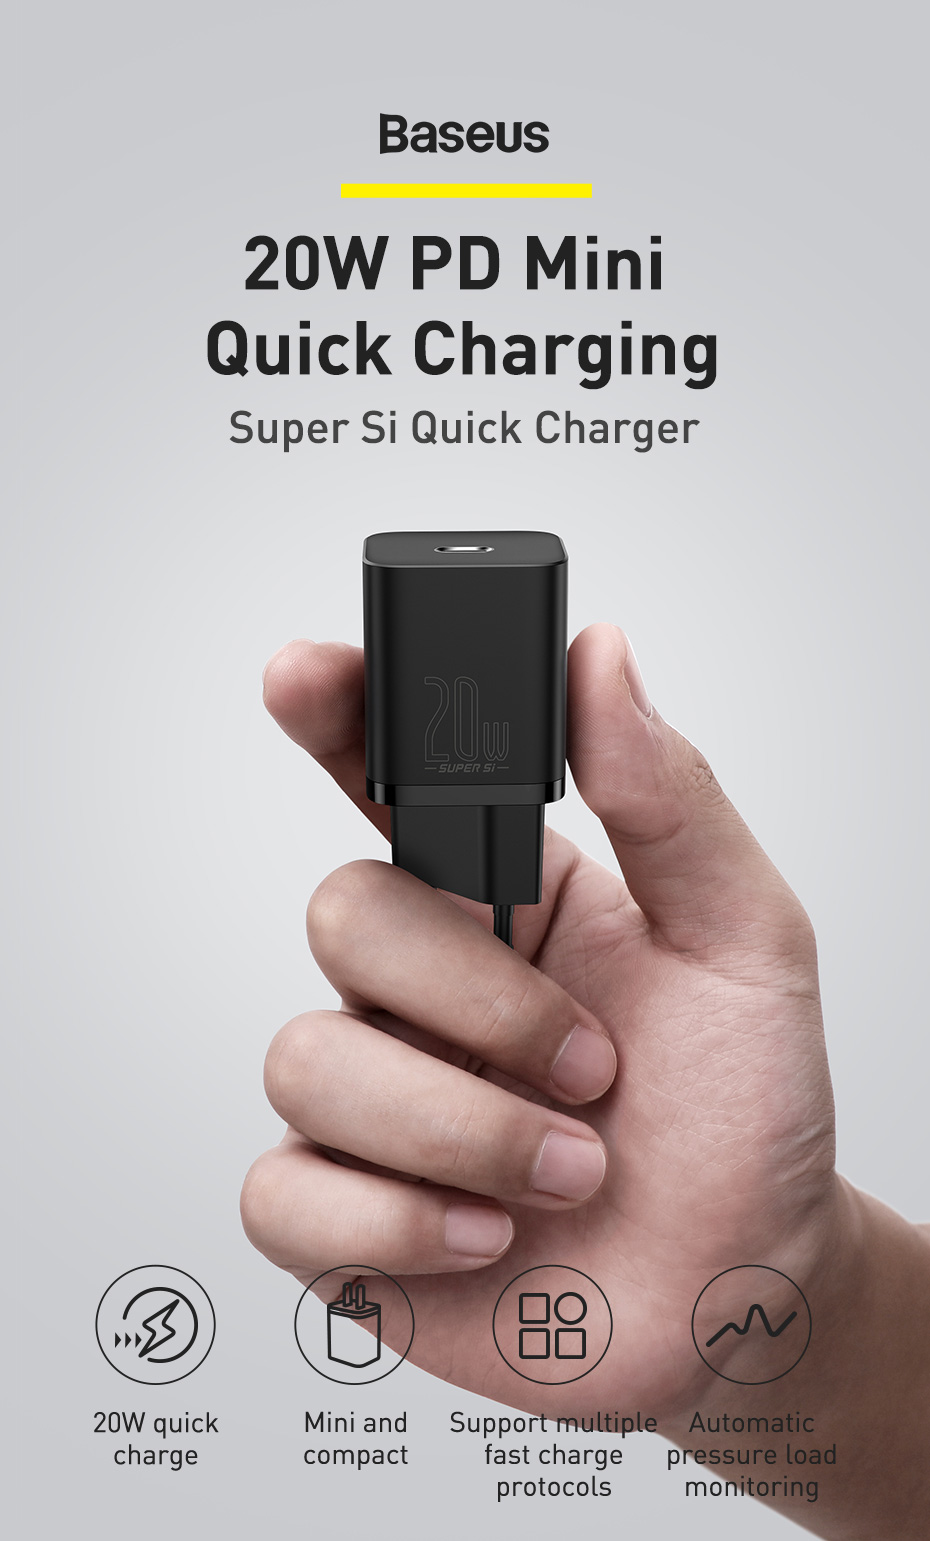 Baseus-20W-PD-Super-Si-Quick-Charger-for-iPhone-12-Mini1212-Pro12-Pro-Max-for-Samsung-Galaxy-Note-S2-1778041-1